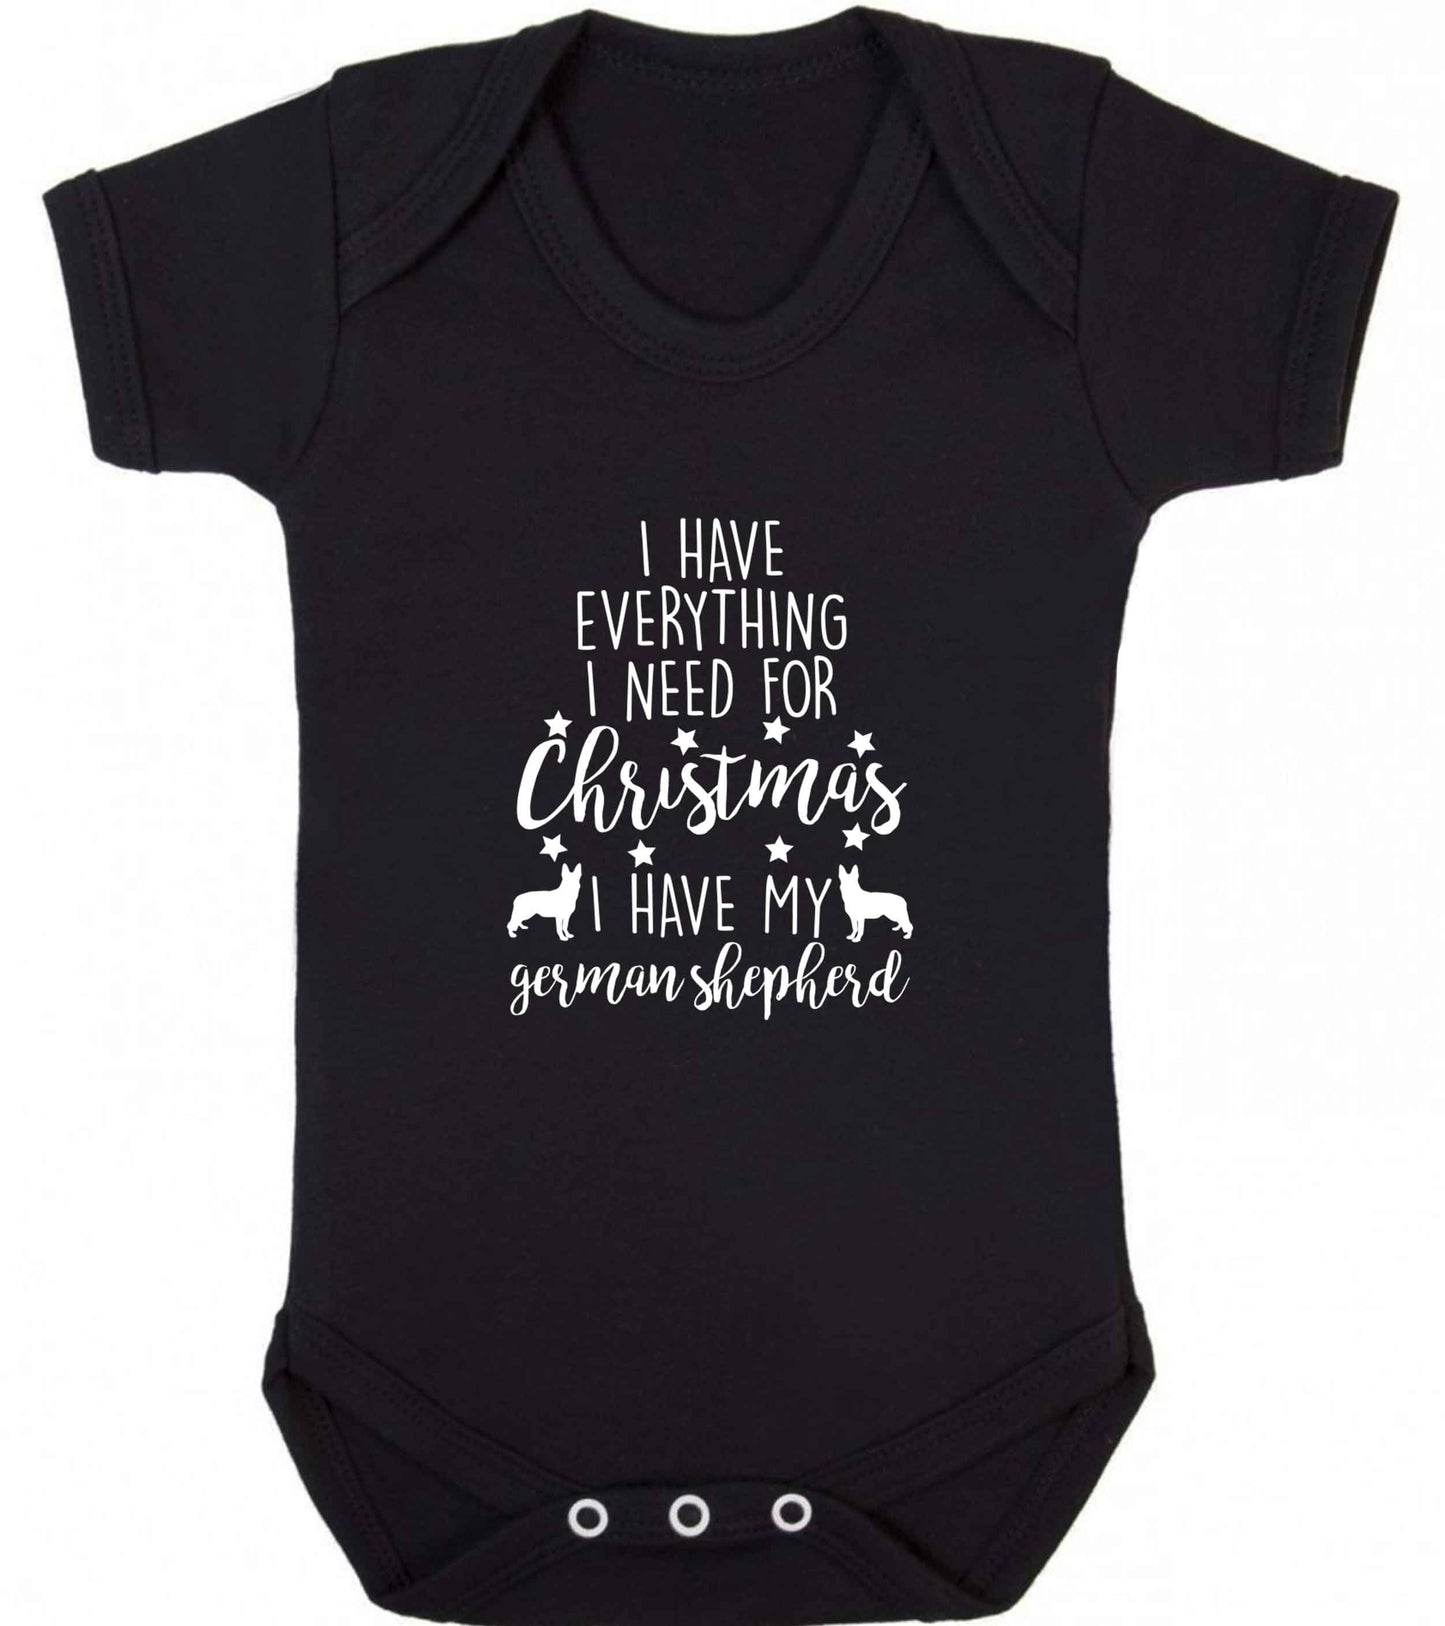 I have everything I need for Christmas I have my german shepherd baby vest black 18-24 months